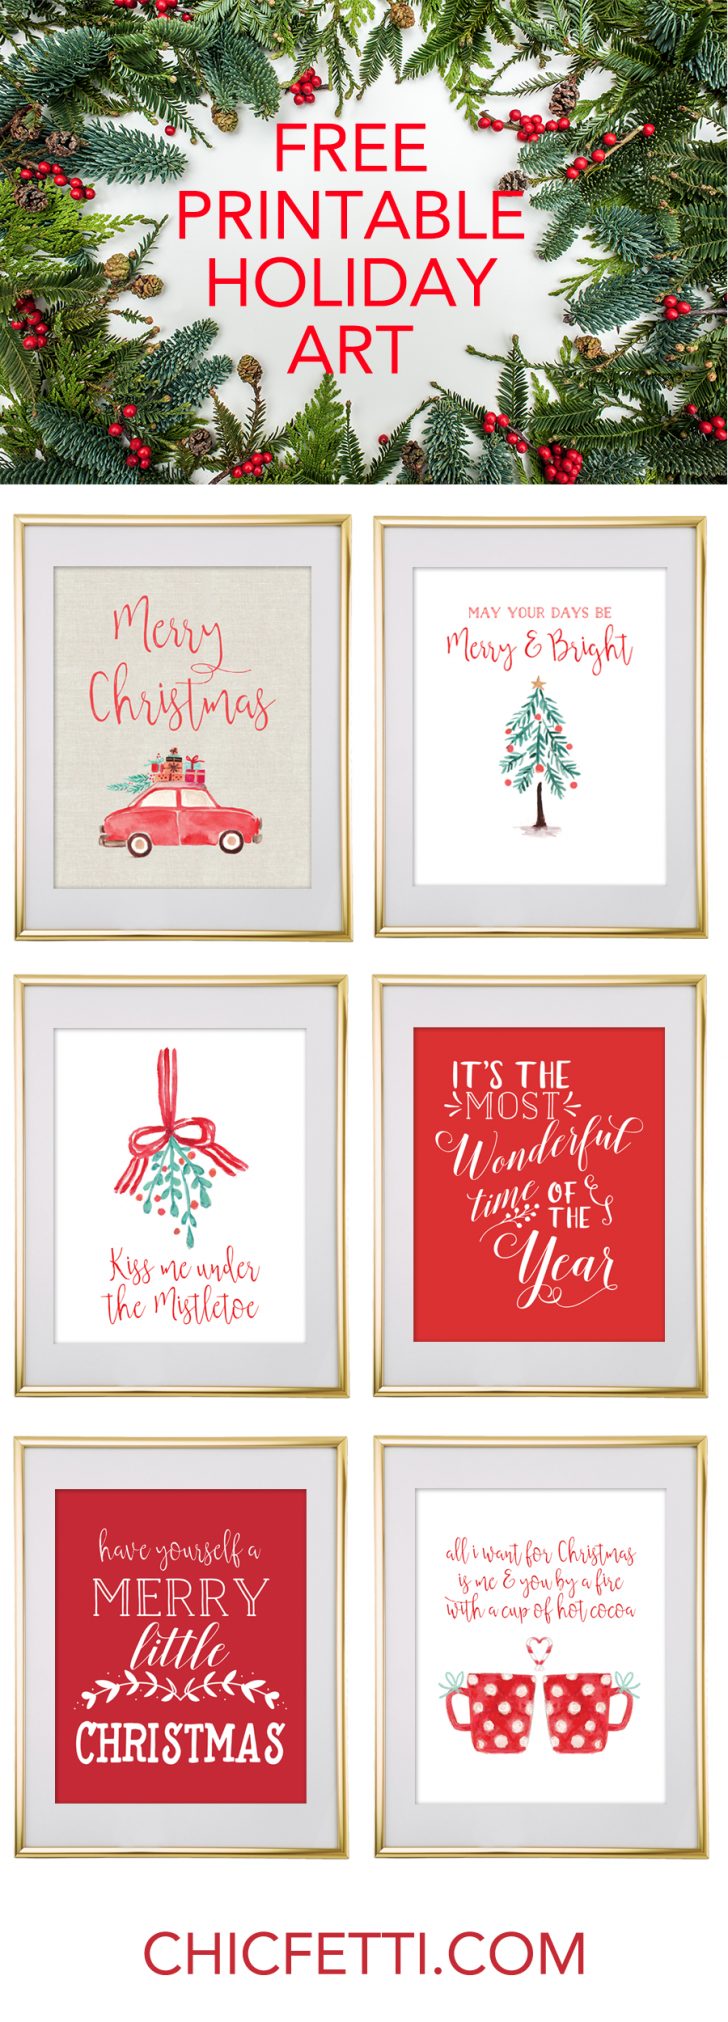 Free Printable Christmas Party Signs